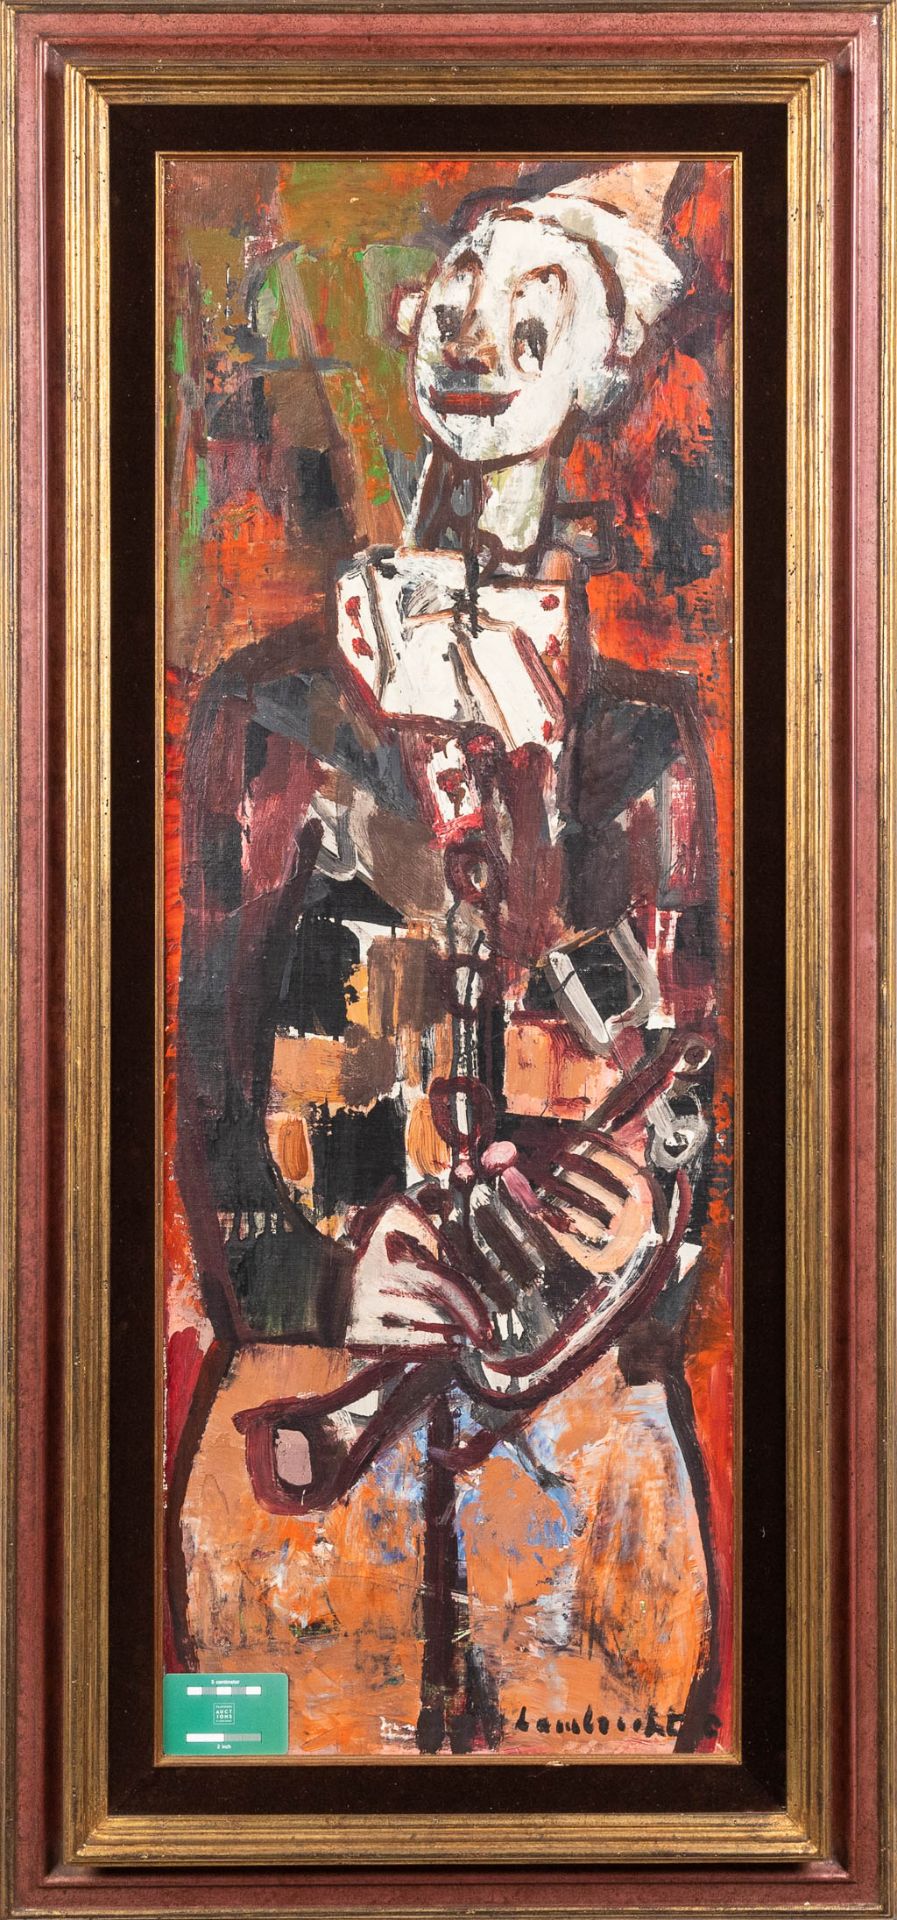 Constant LAMBRECHT (1915-1993) 'Expressionist Clown' oil on board. (W: 40 x H: 110 cm) - Image 2 of 7